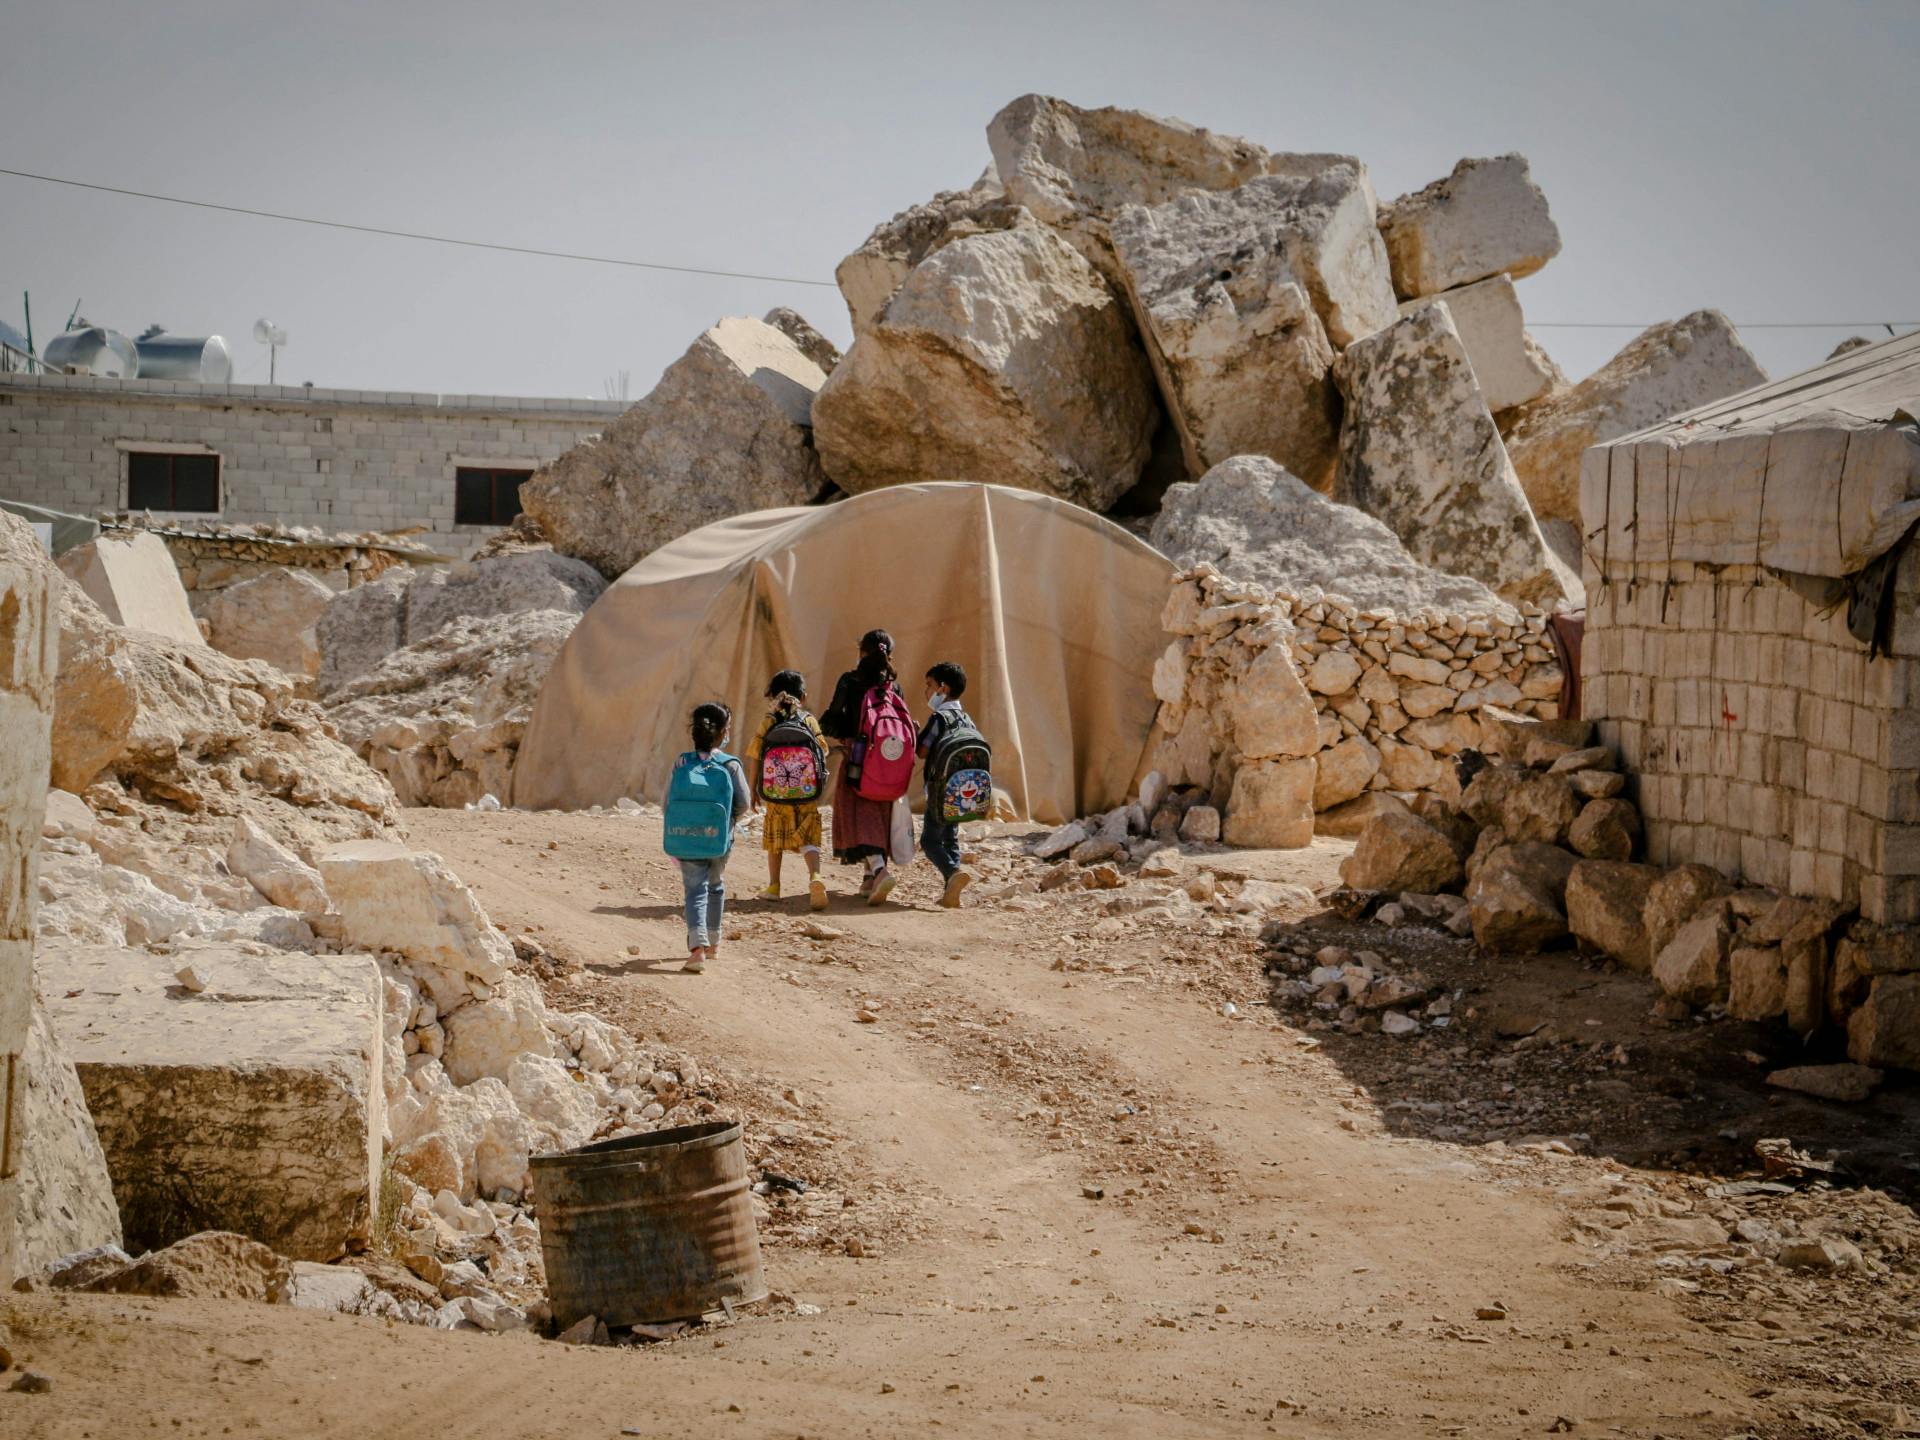 A group of children walk through the ruins of Idlib in Syria.